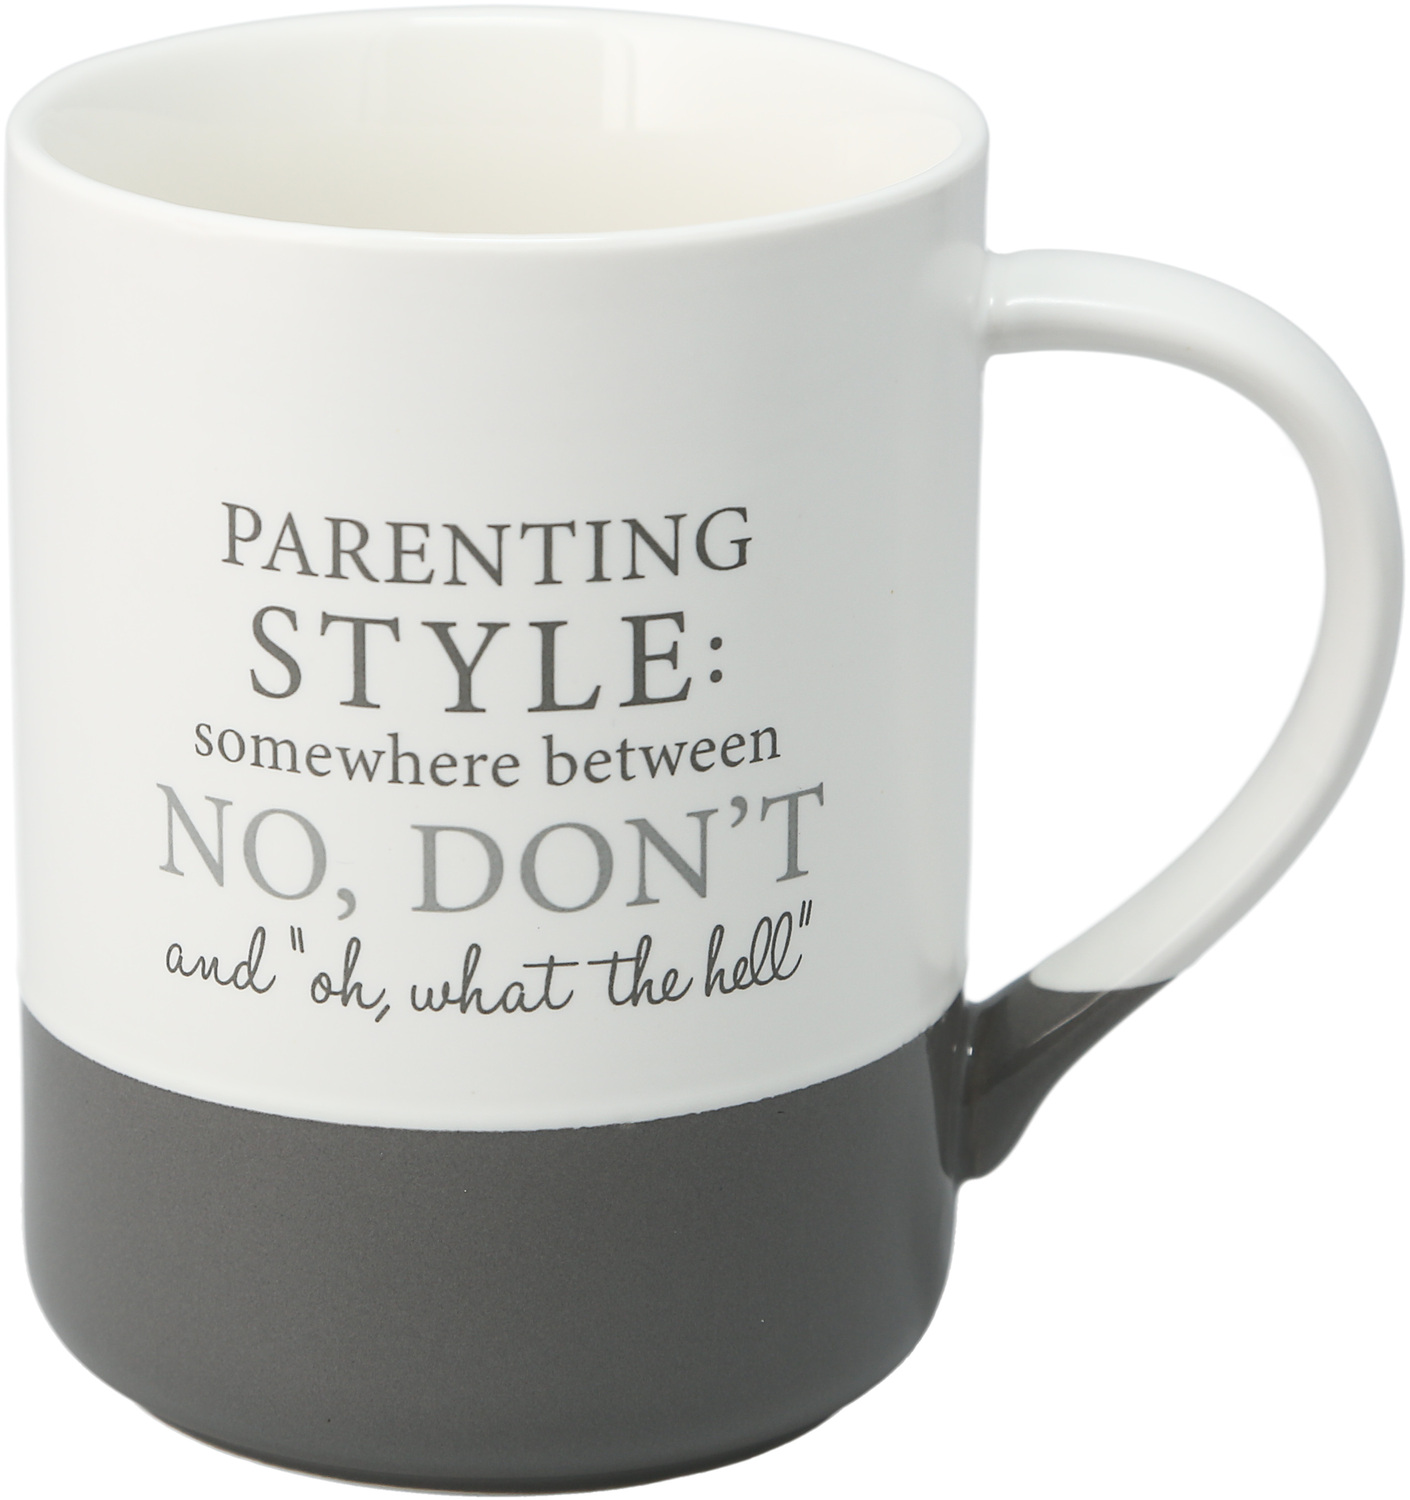 Parenting Style by A-Parent-ly - Parenting Style - 18 oz Mug